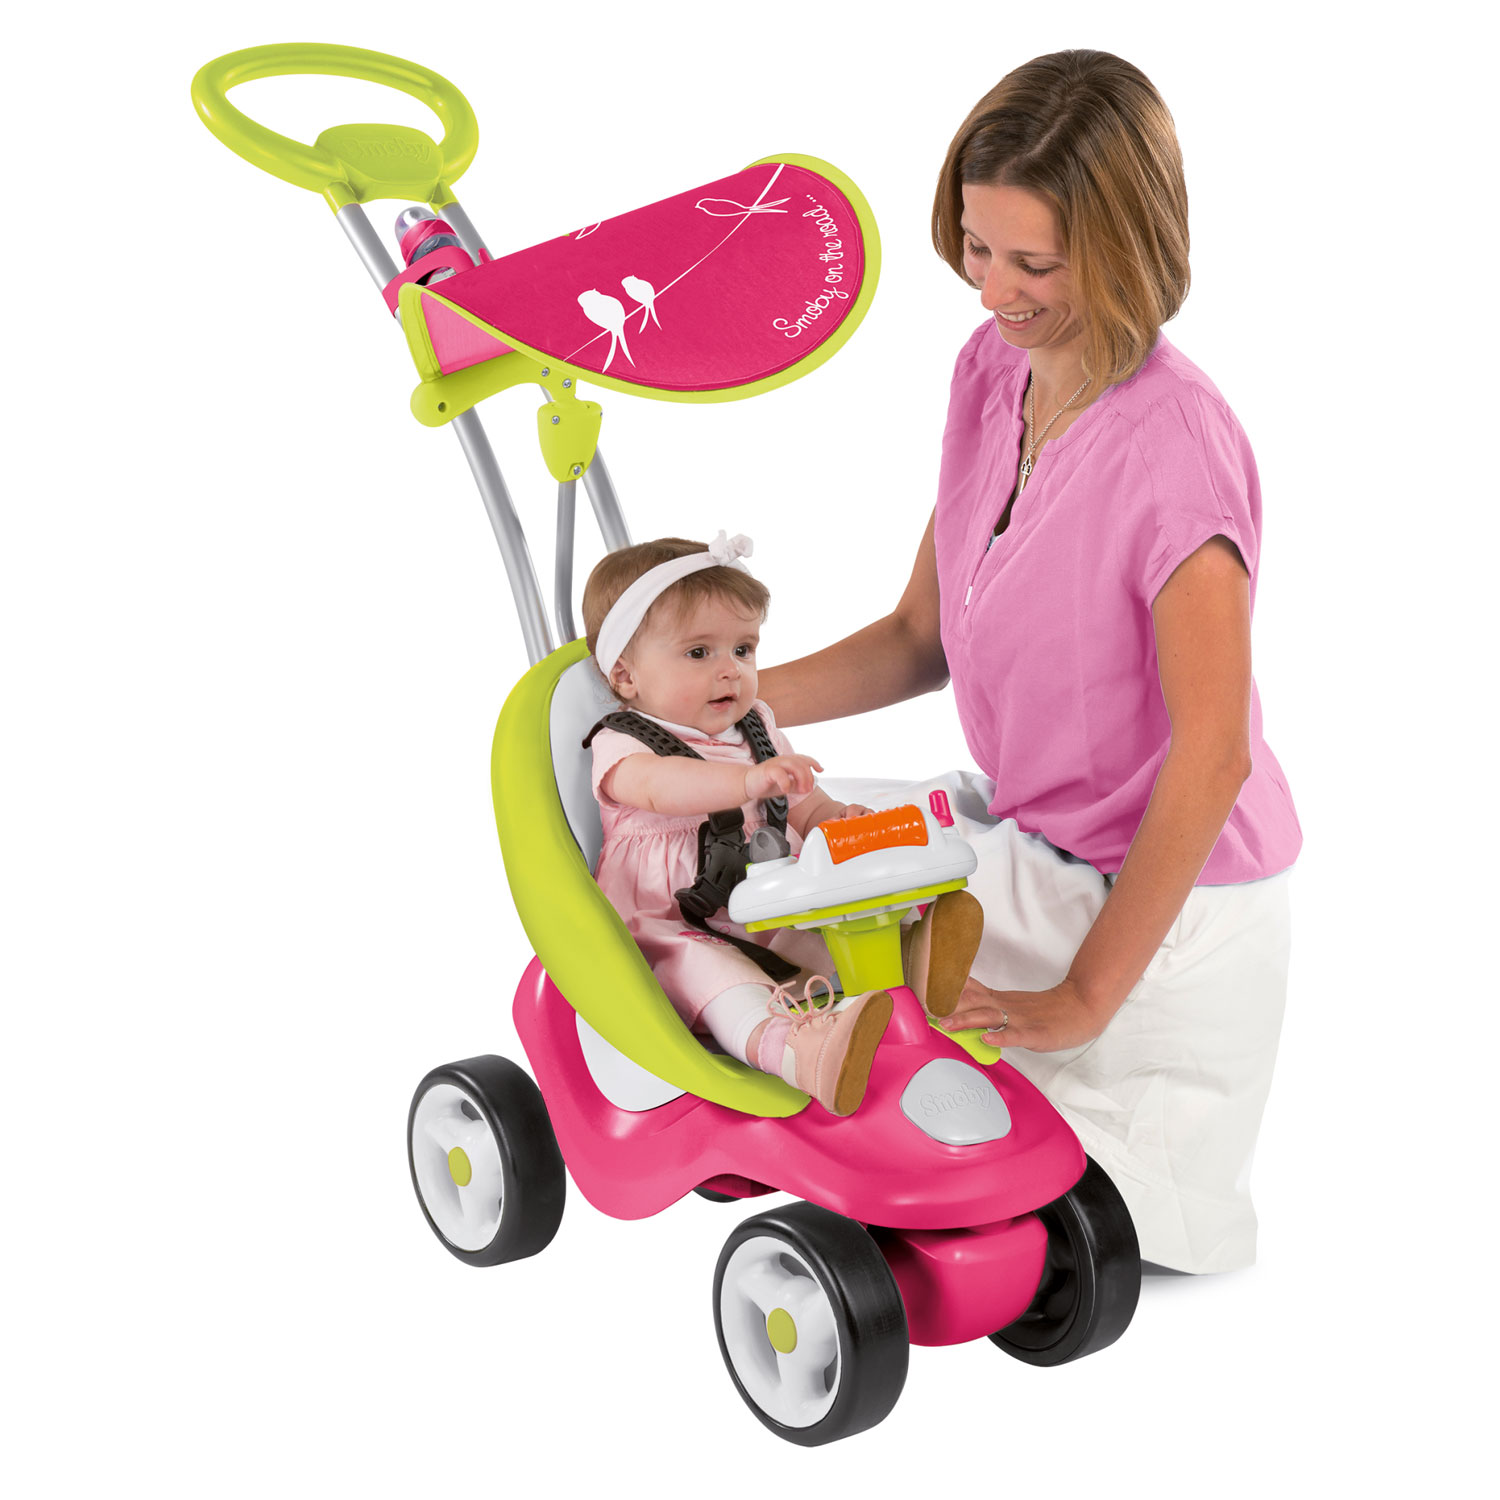 Smoby Bubble Go Ride On Roze